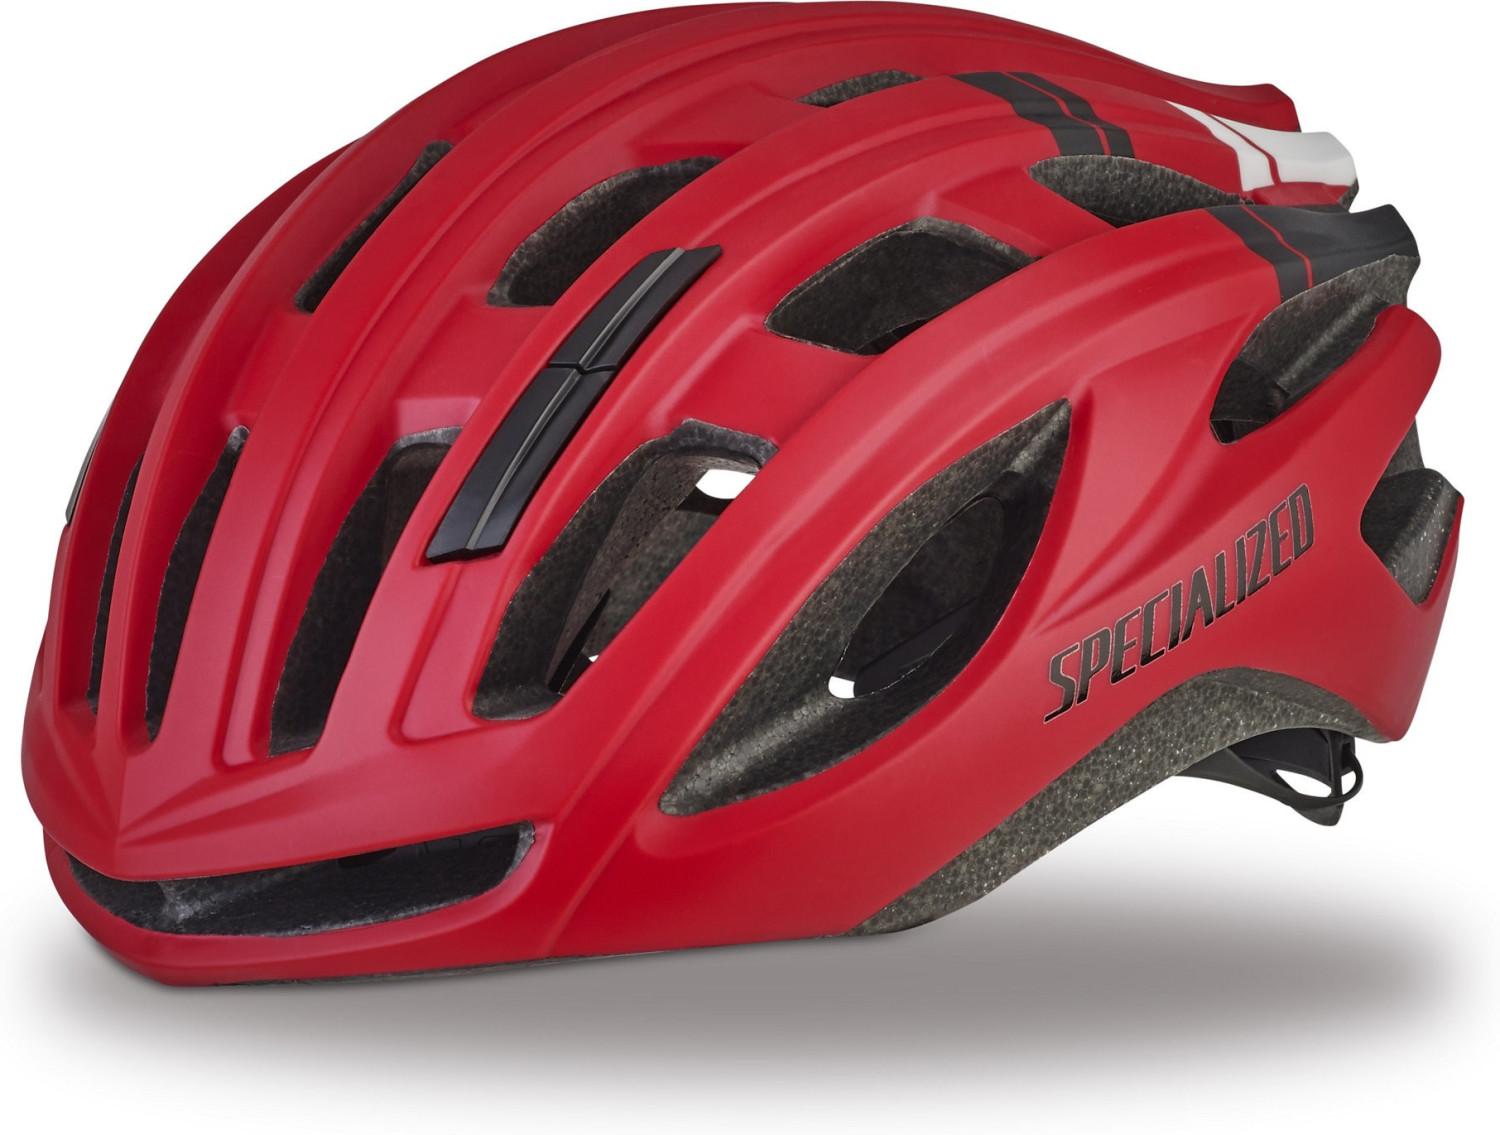 Specialized Propero 3 red